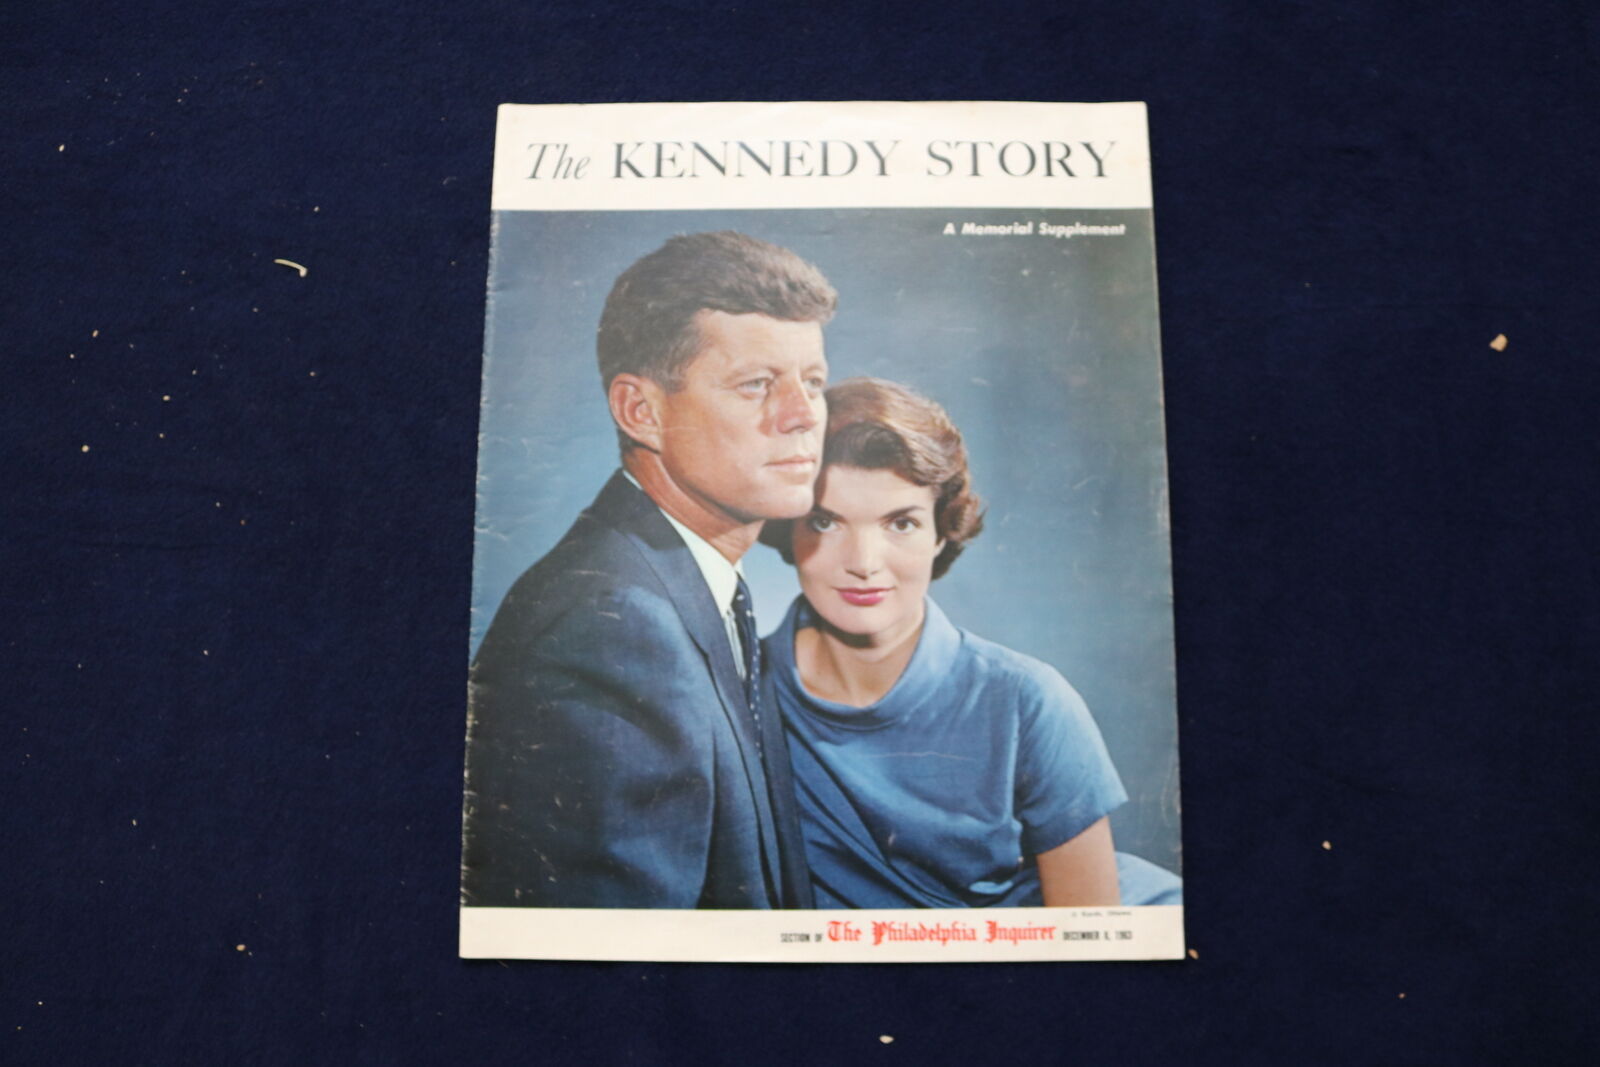 1963 DECEMBER 8 THE PHILADELPHIA INQUIRER SECTION - THE KENNEDY STORY - NP 8700